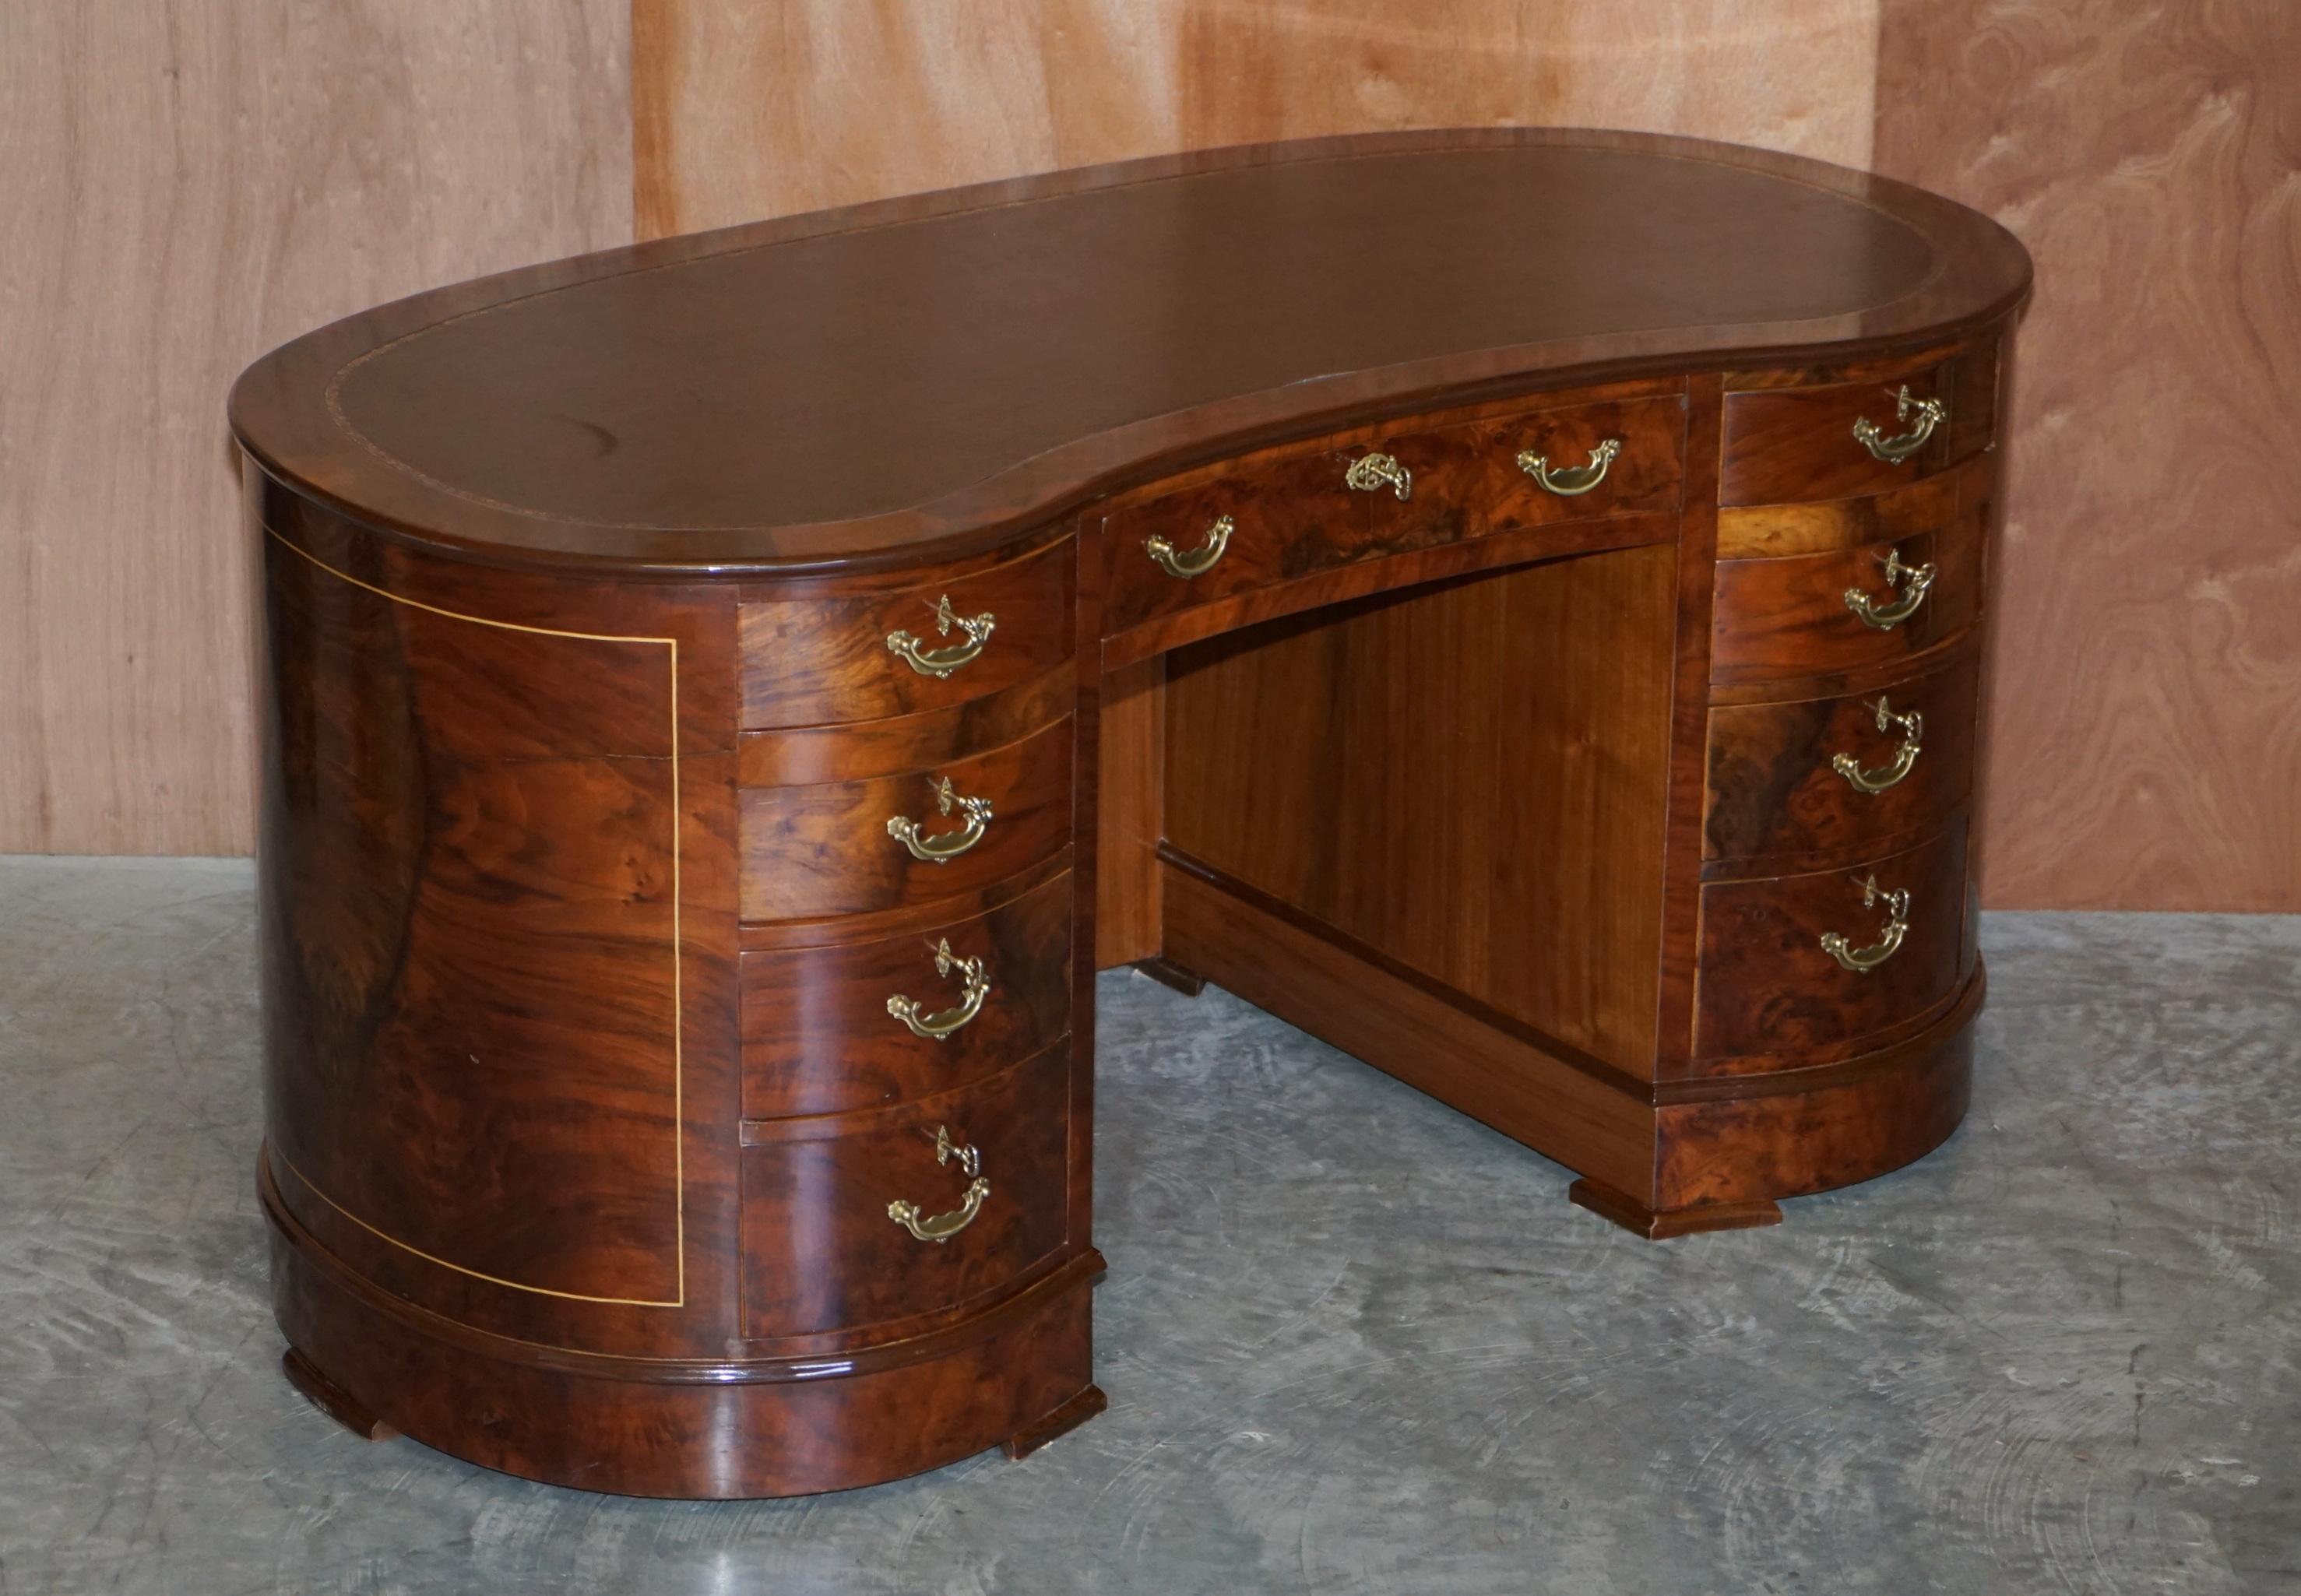 We are delighted to offer for sale this Burr & Burl walnut veneer kidney desk with nine drawers to the front and twin cupboards to the rear

A good-looking well-made desk, its one solid piece and very substantial. The desk has nine drawers to the